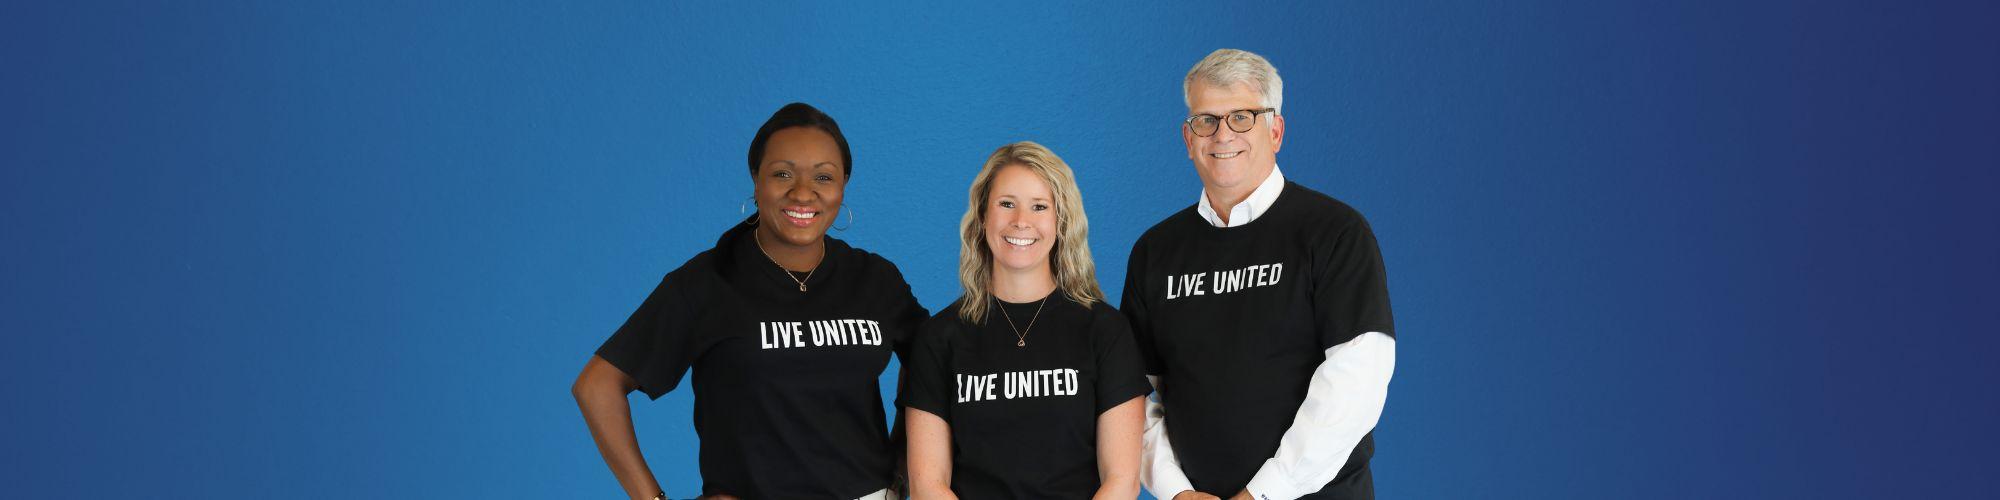 People in Live United Shirts